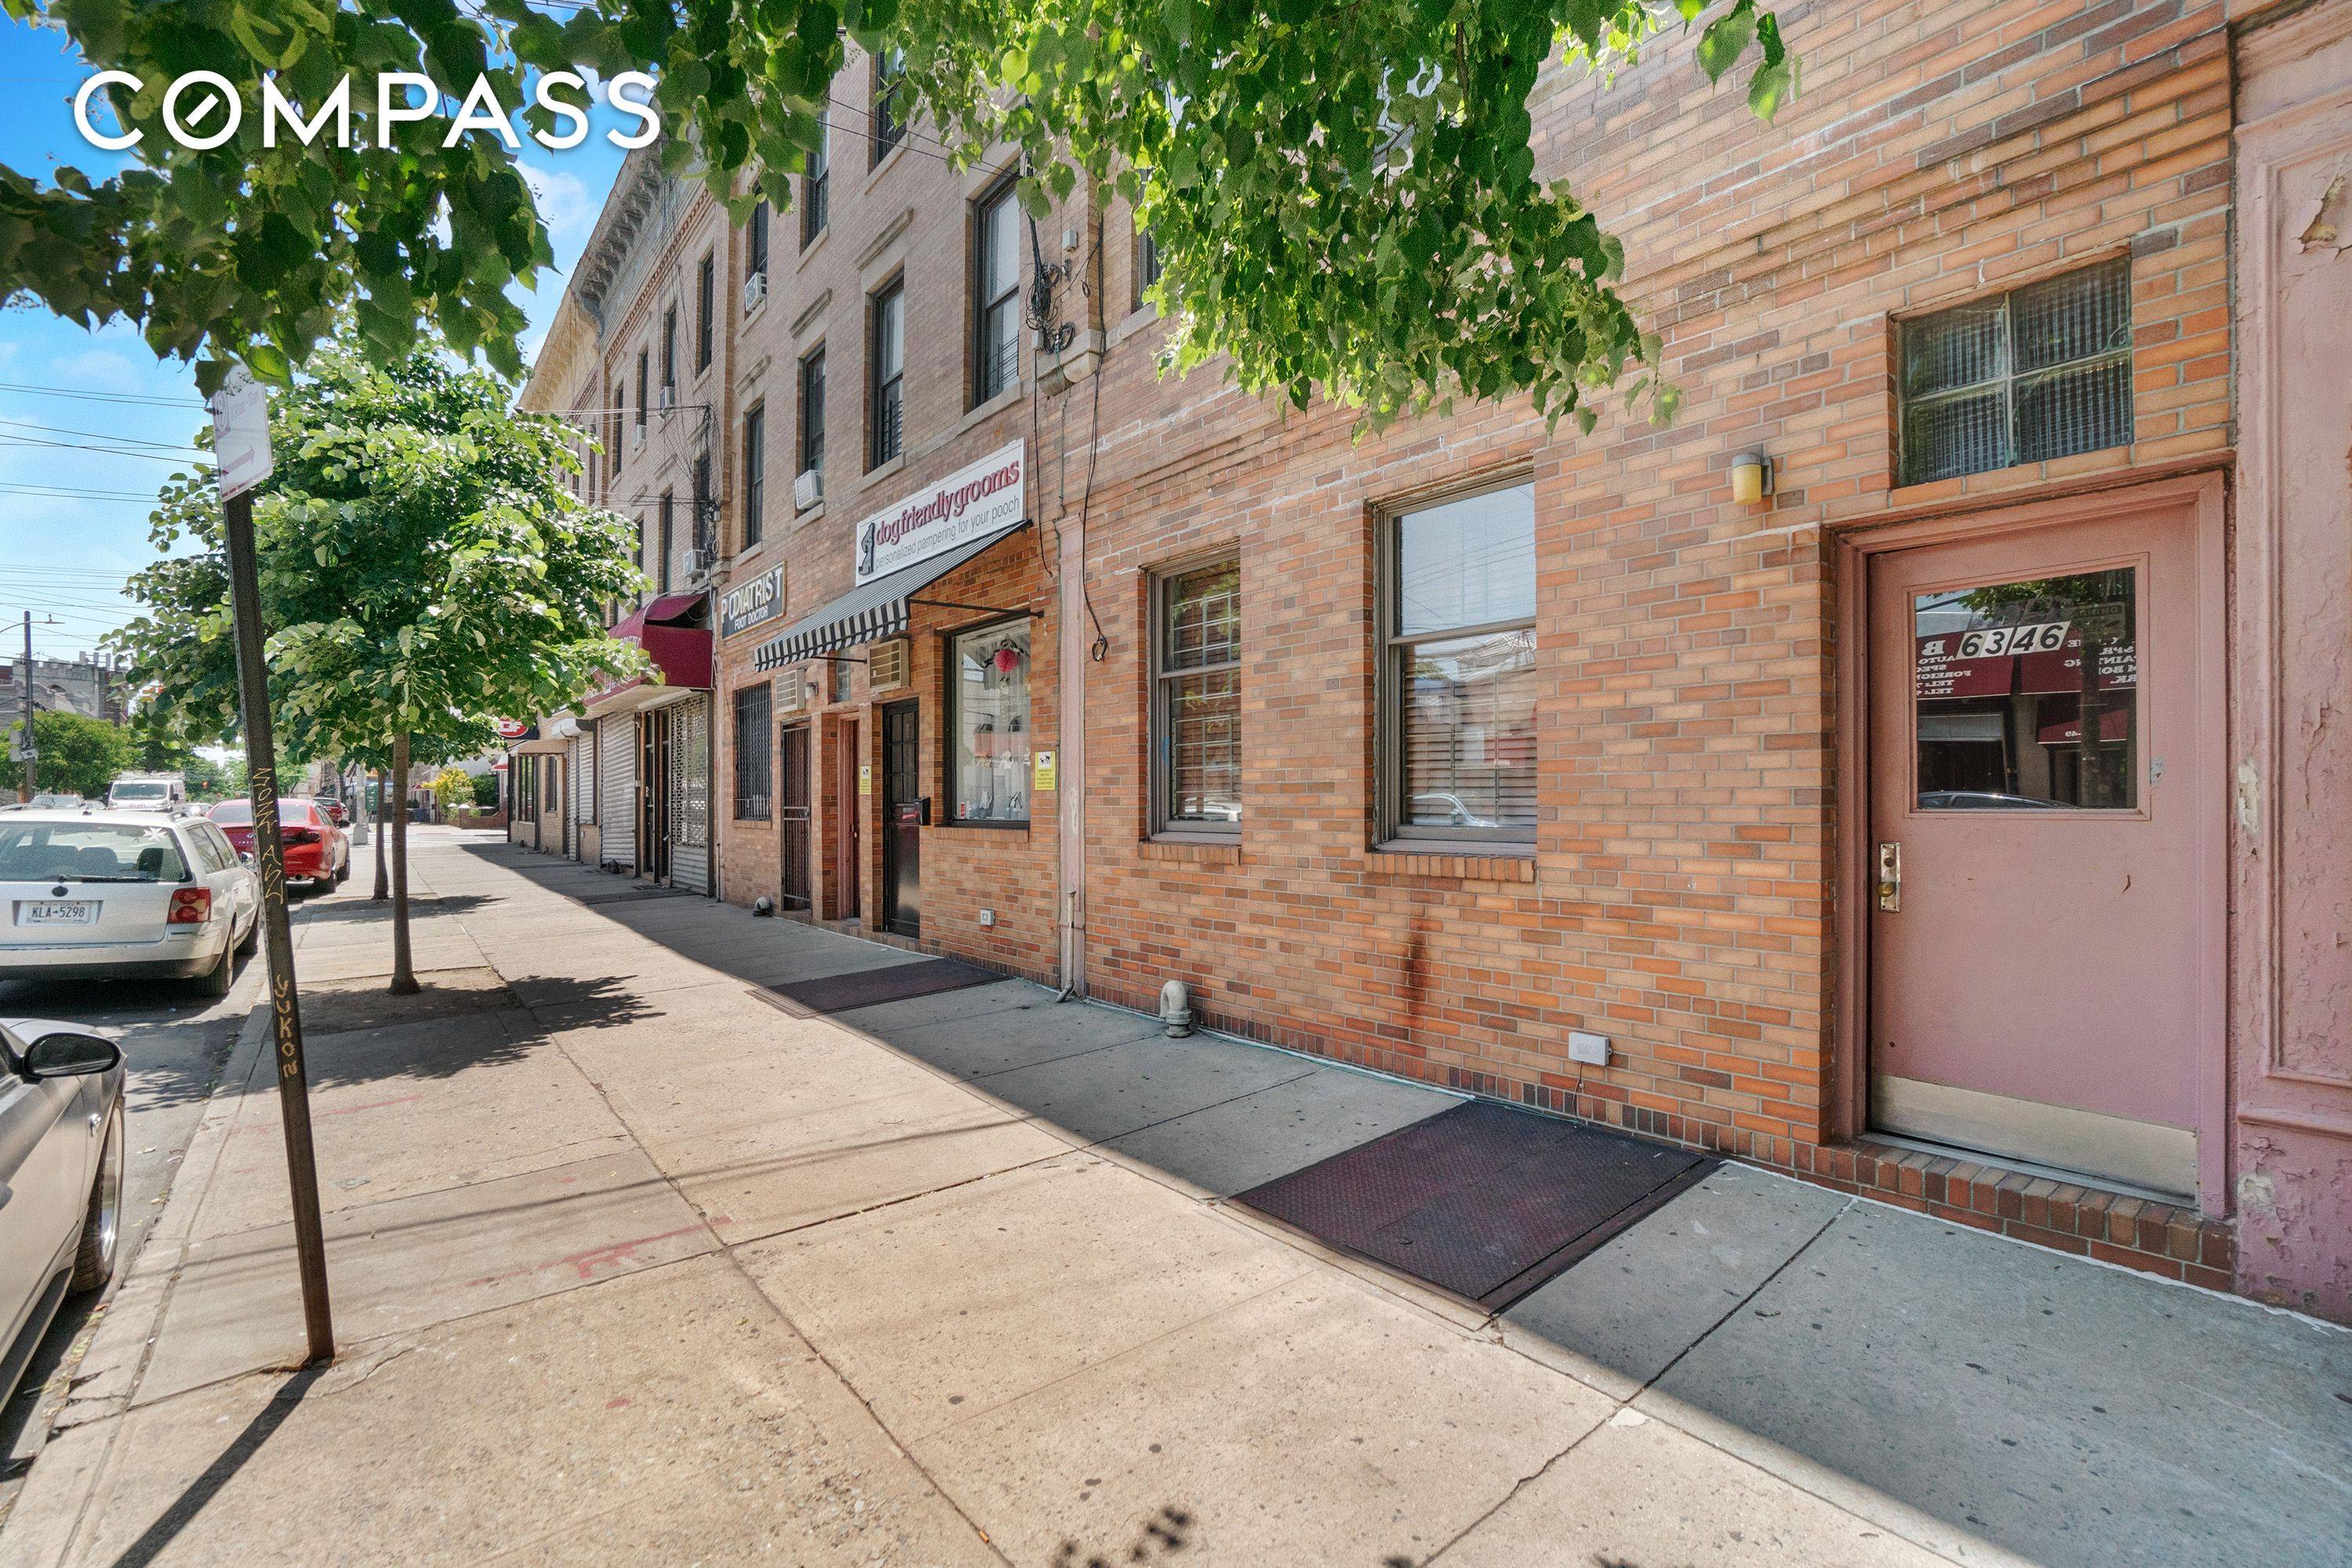 I am excited to present this large 20 100 brick building boasting 3, 387 interior square feet.